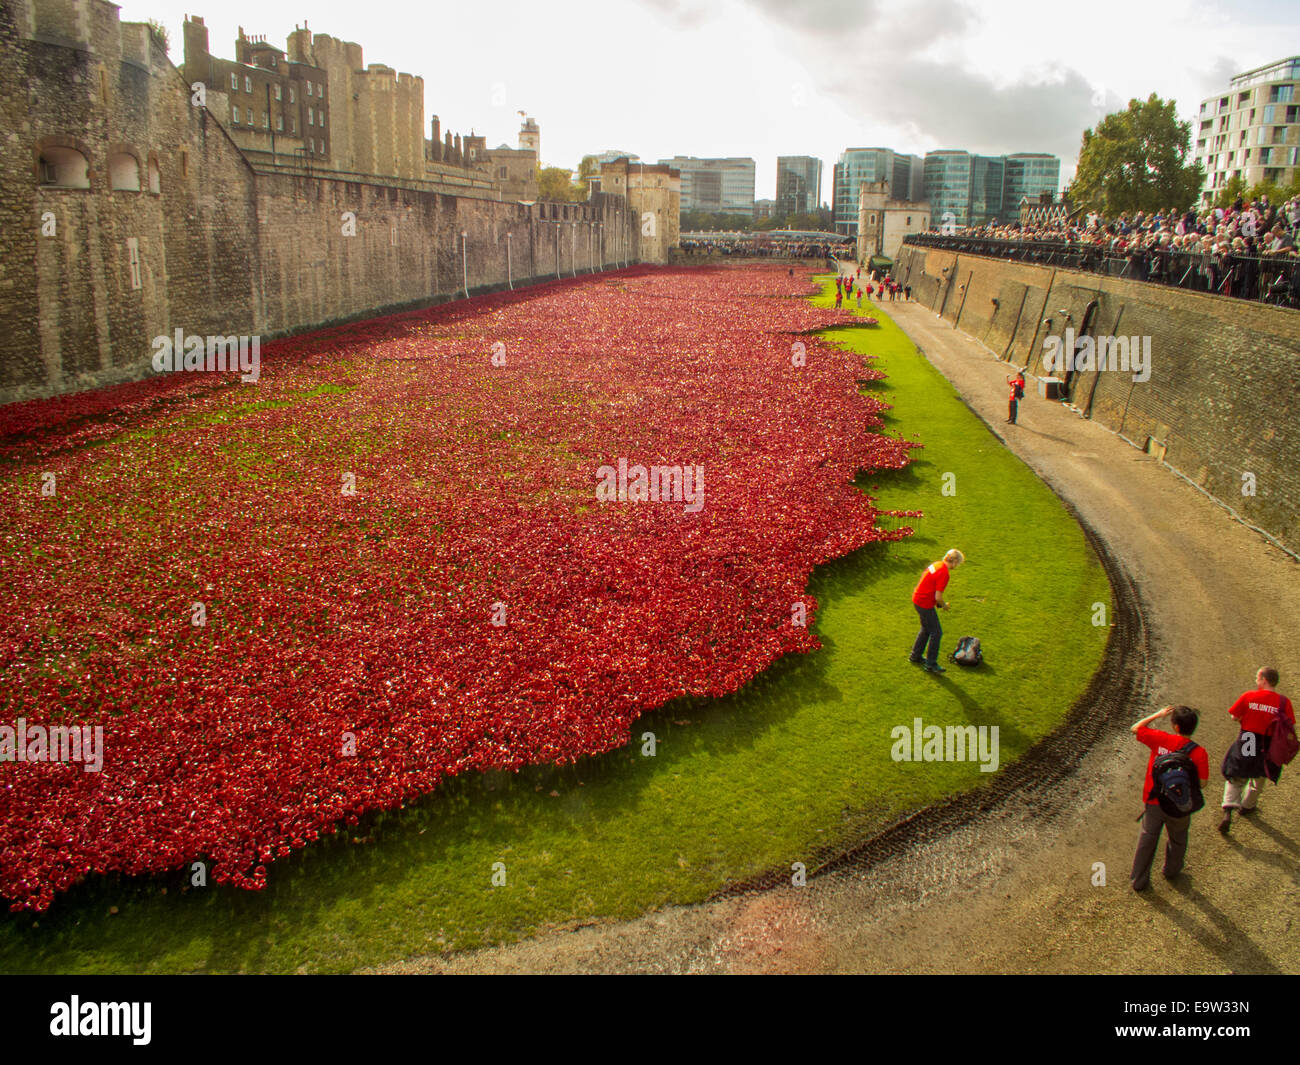 Blood swept lands and seas of red. The poppies at the Tower of London. Very poignant  reminder of our 1st world war ,dead. Stock Photo